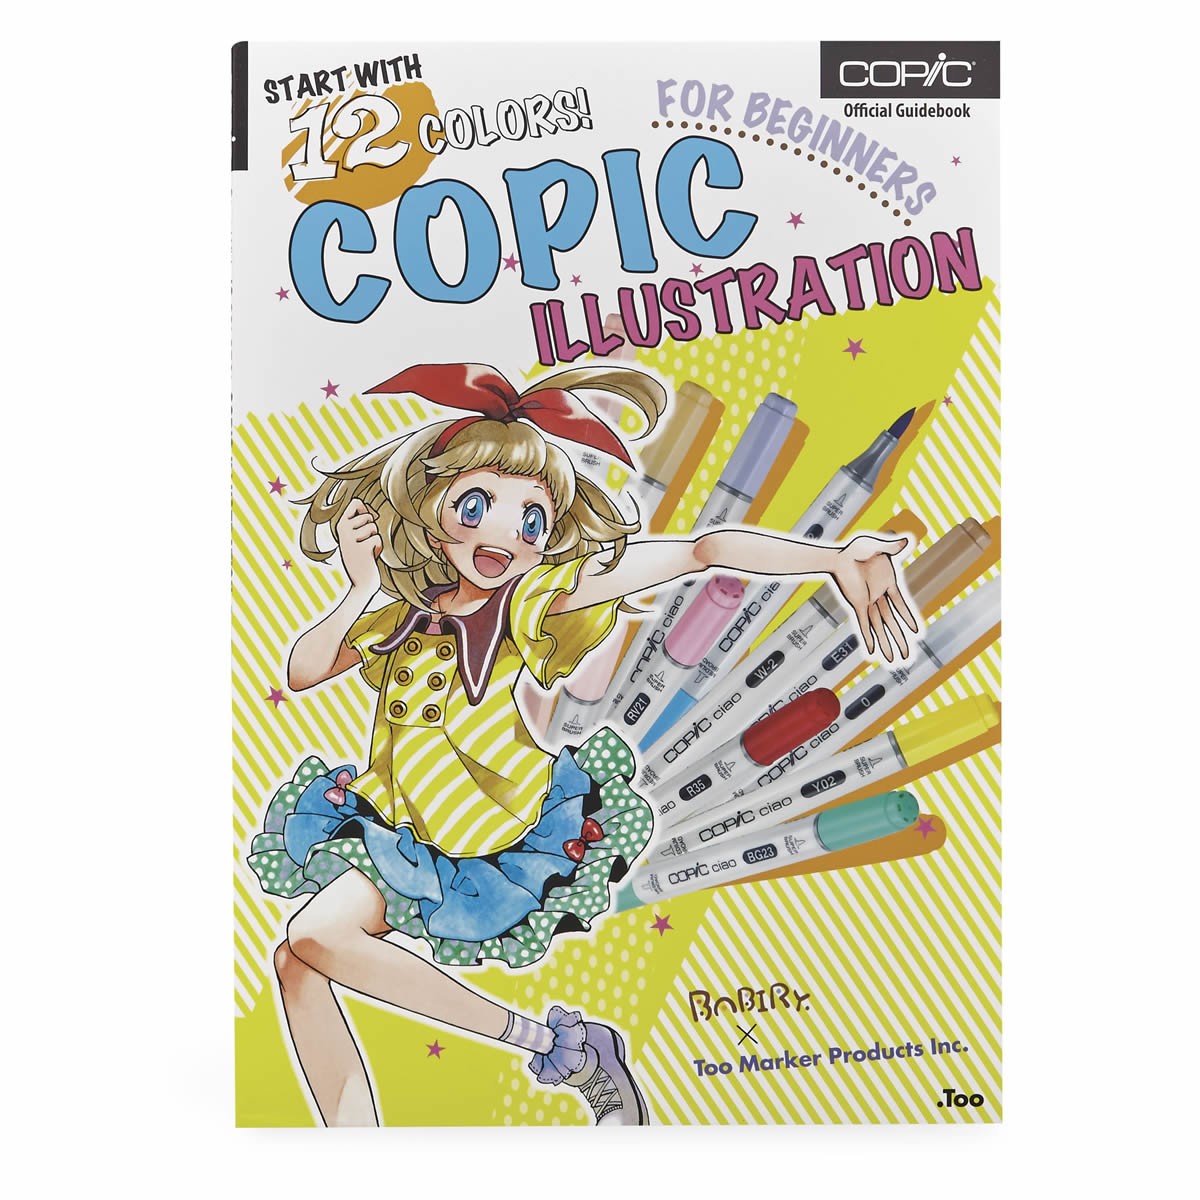 Copic Illustration for Beginners